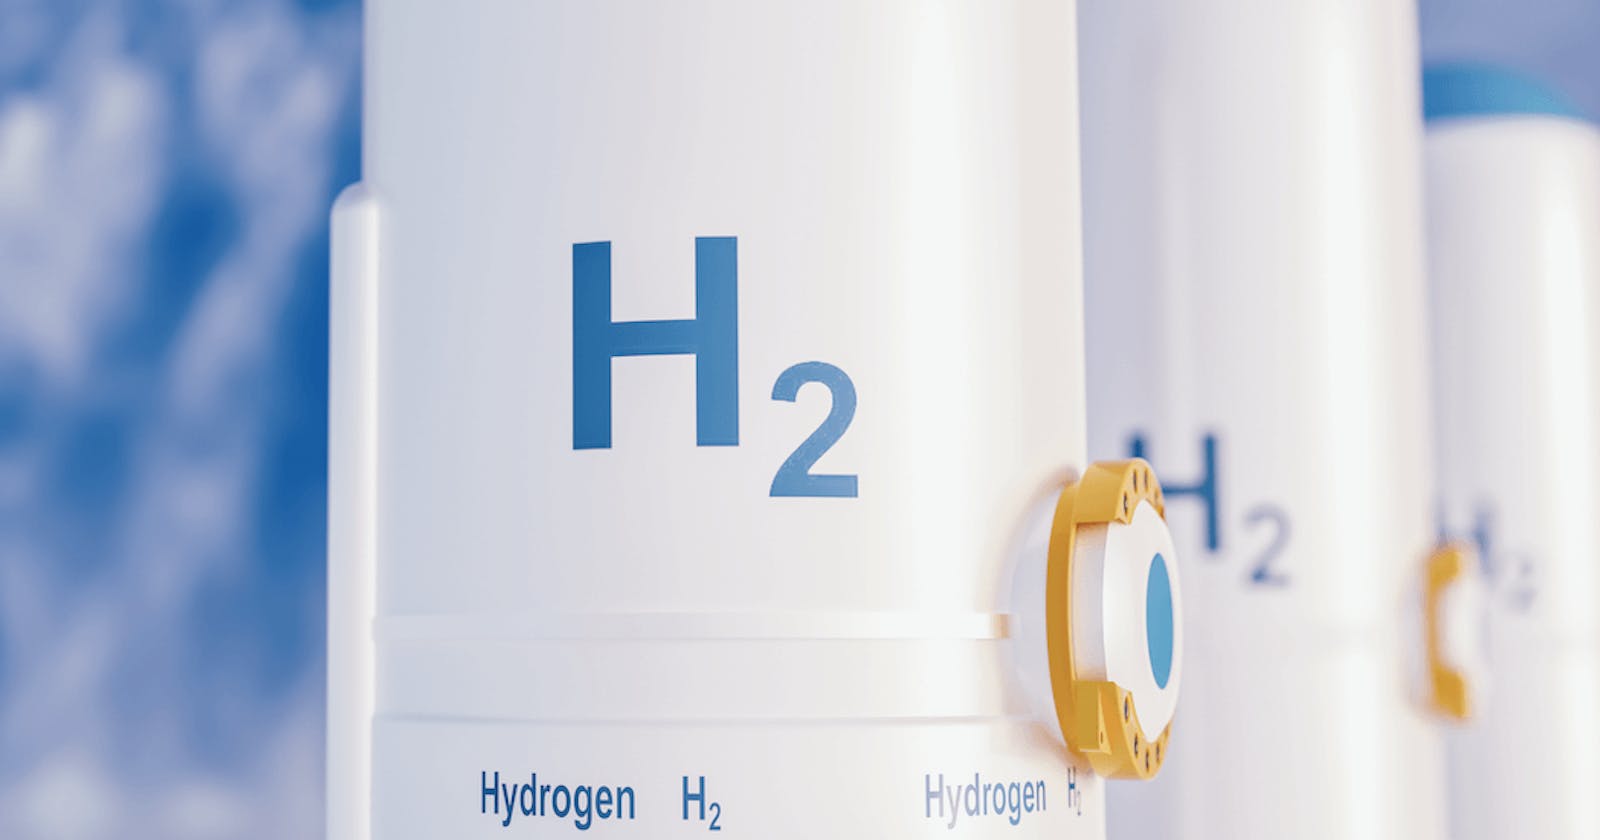 Hydrogen Generation Market 2021-26: Share, Size, Trends, Analysis, Growth and Forecast